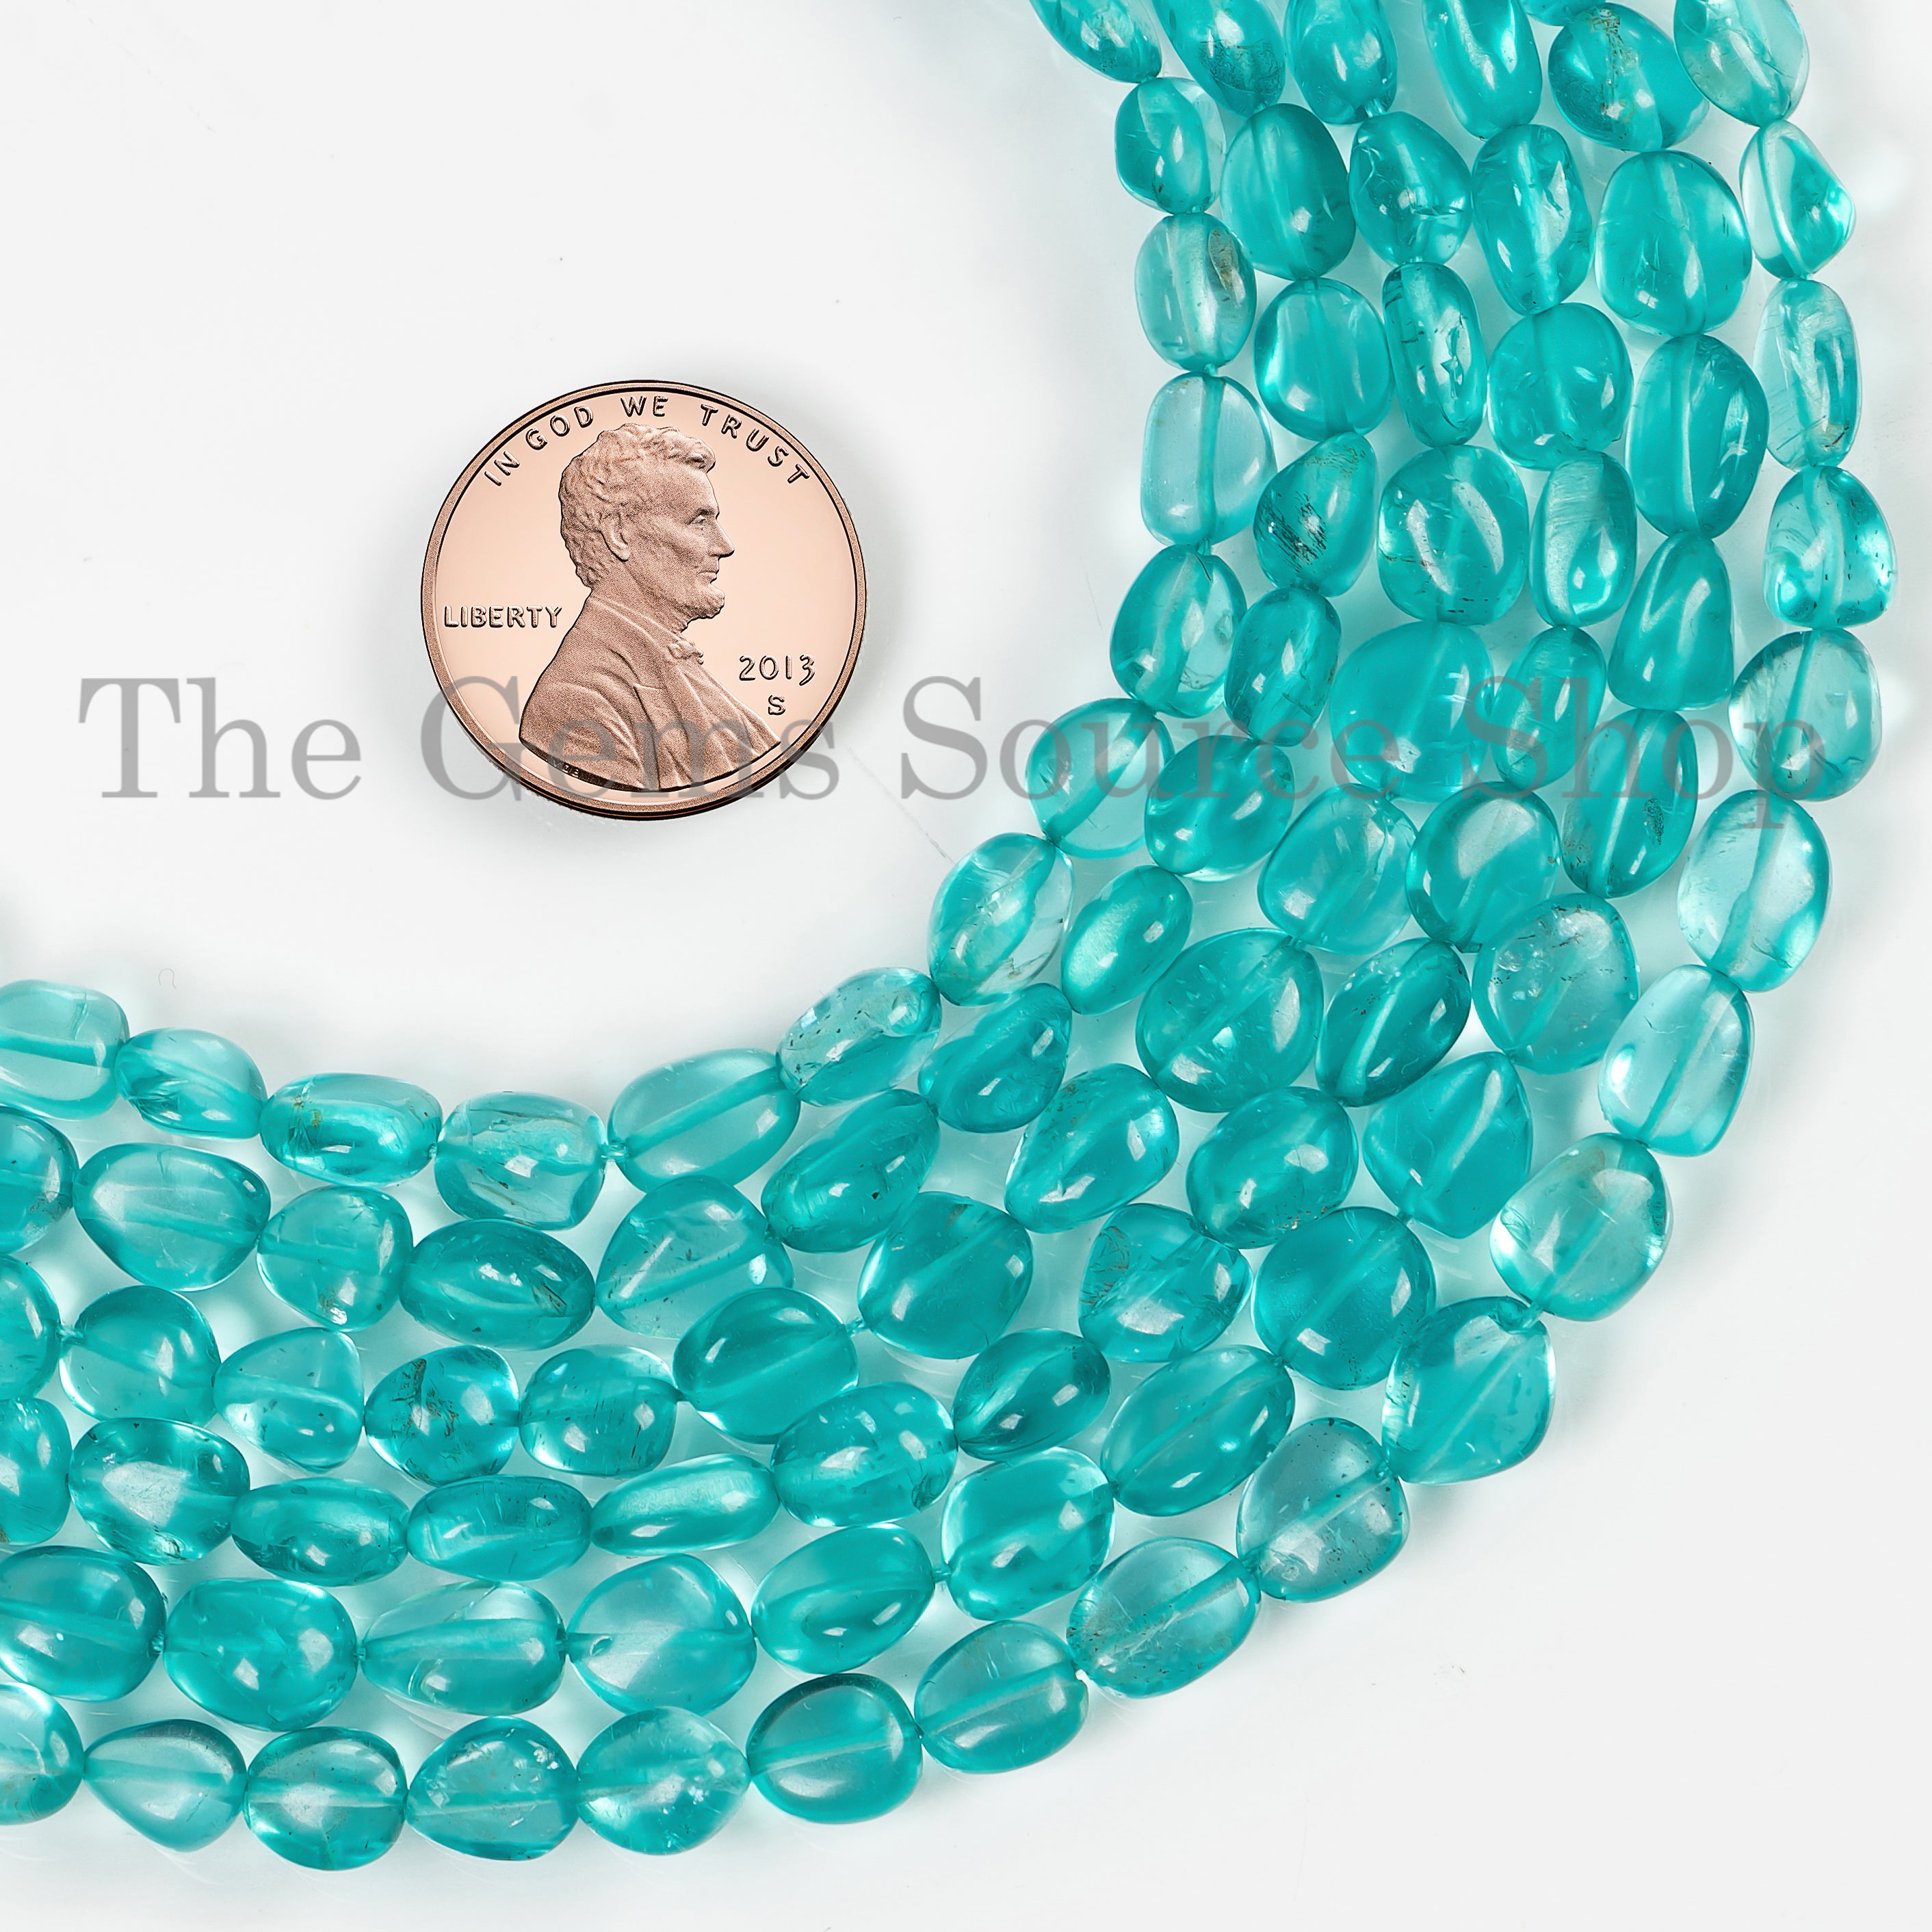 Top Quality Paraiba Color Apatite Beads, Apatite Smooth Nugget Beads, Apatite Gemstone For Jewelry Making